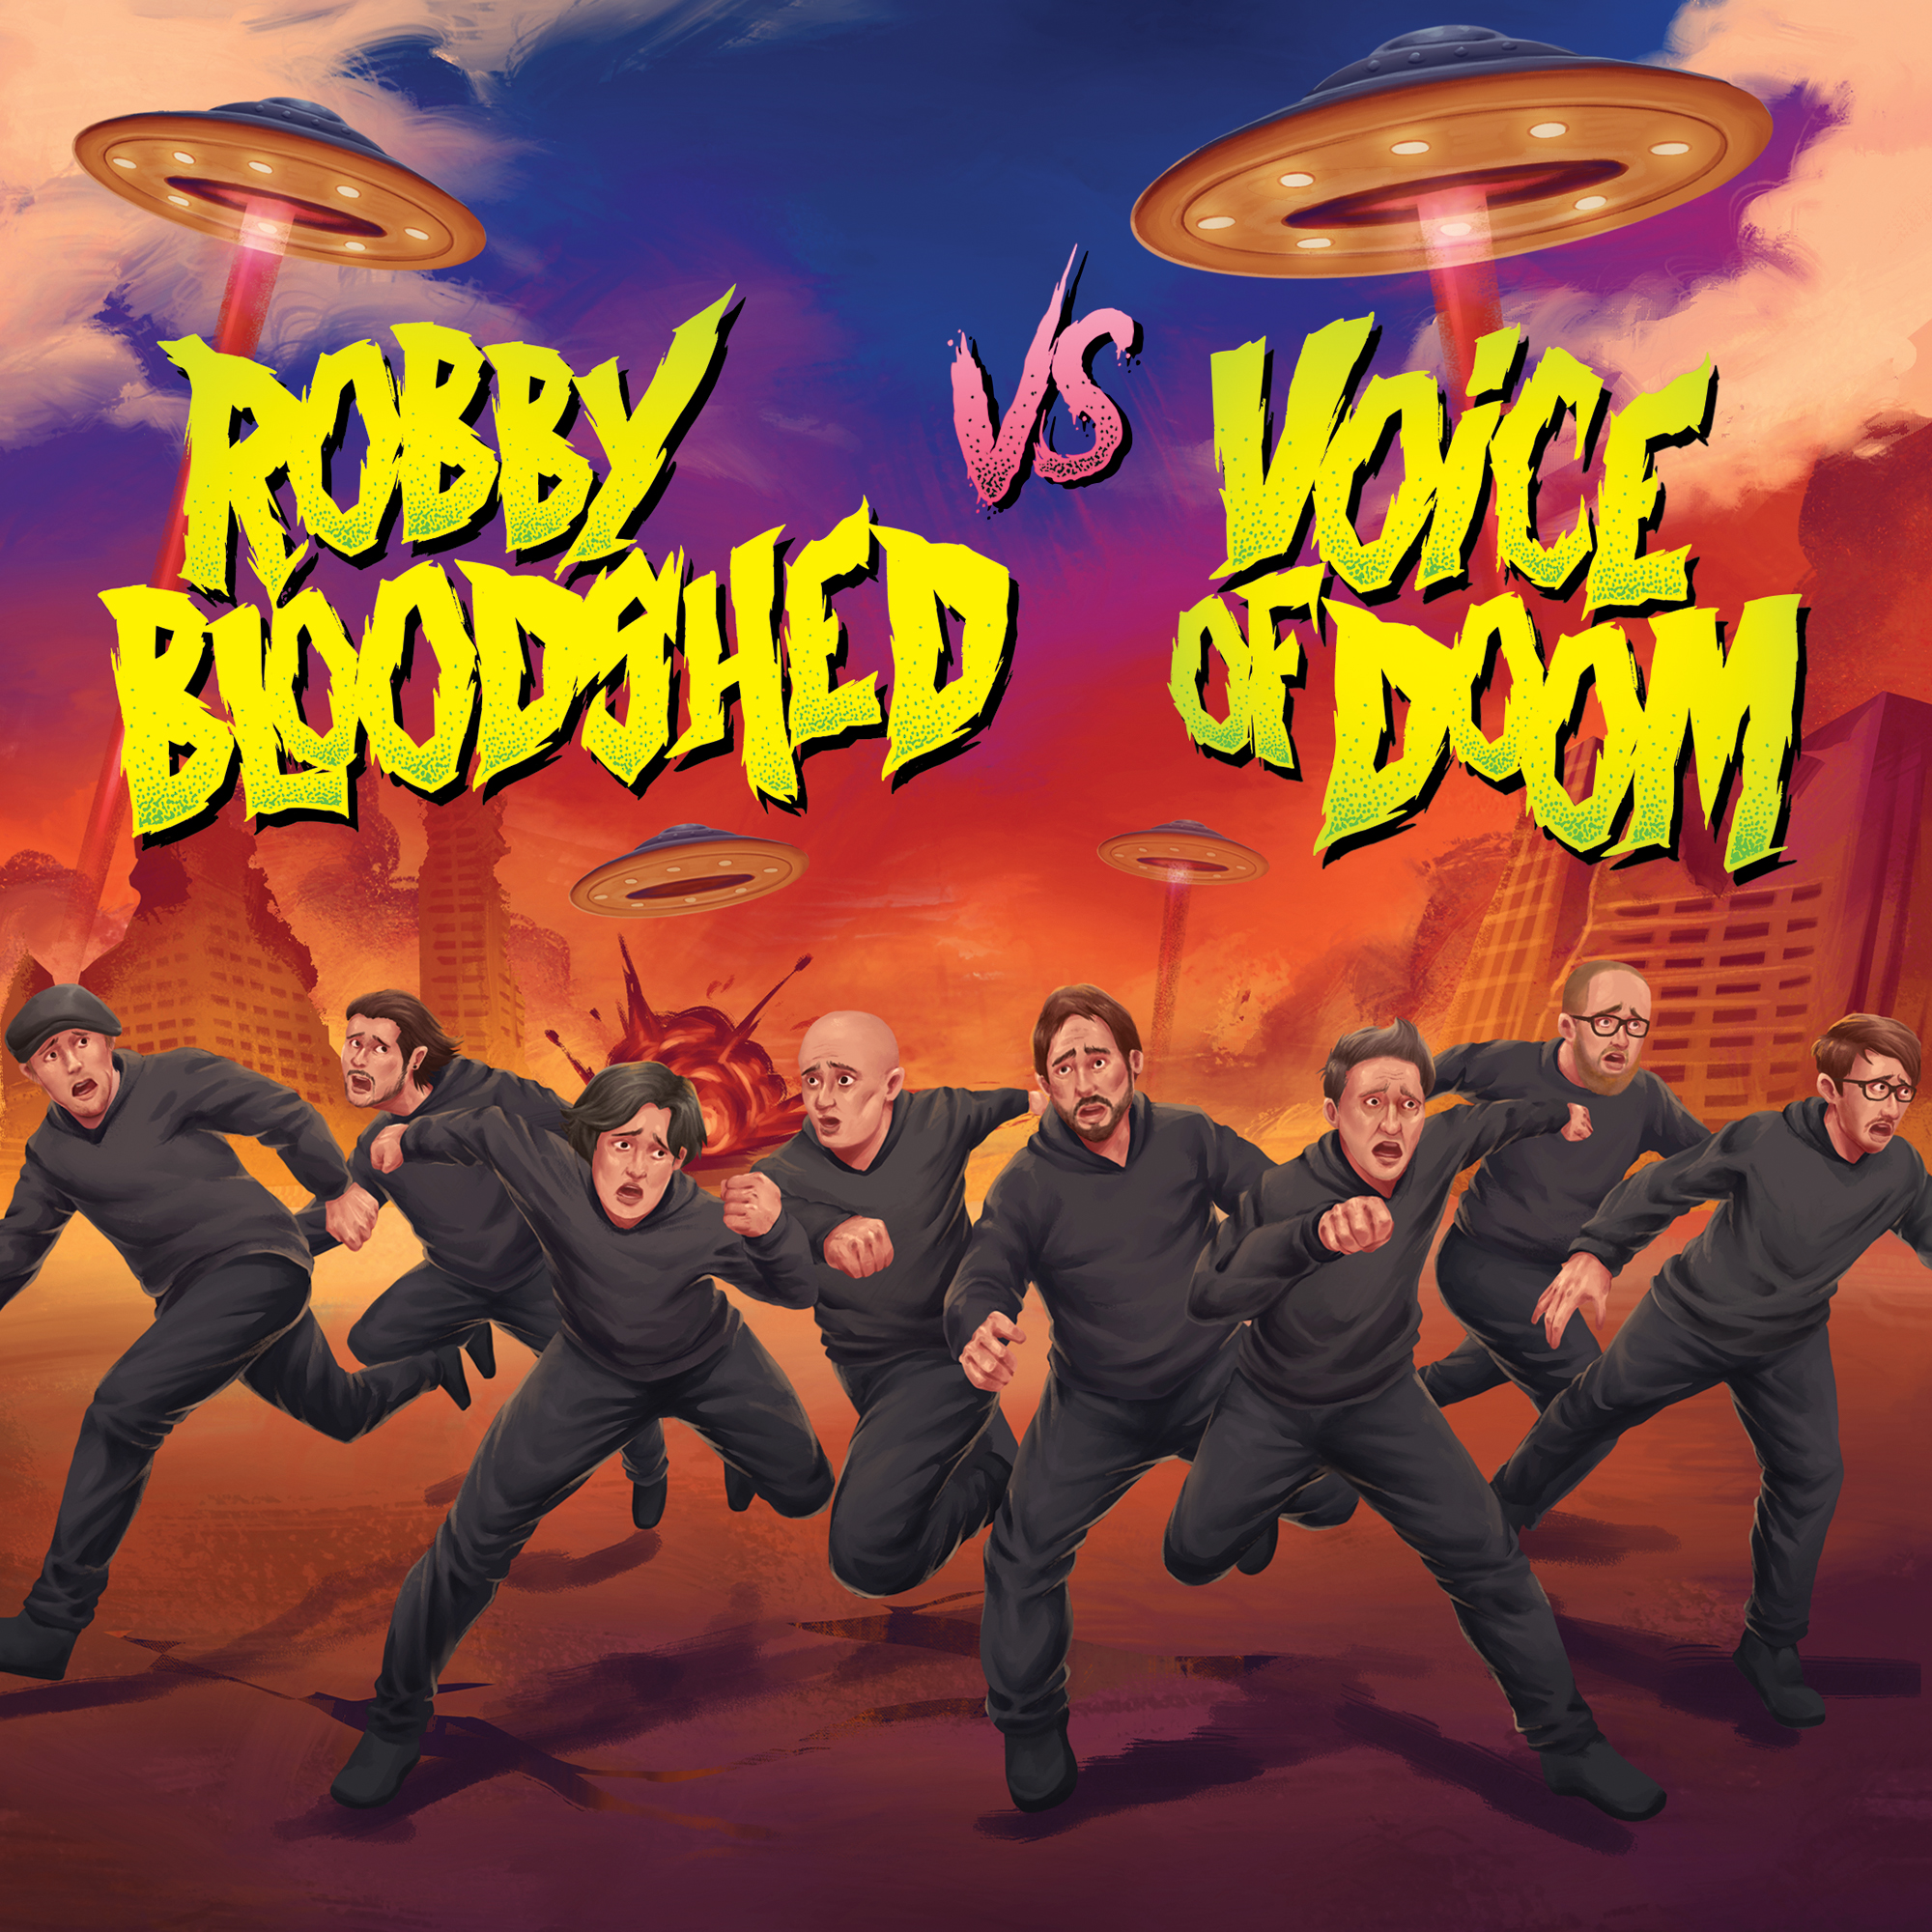 EP REVIEW: Robby Bloodshed vs. Voice of Doom